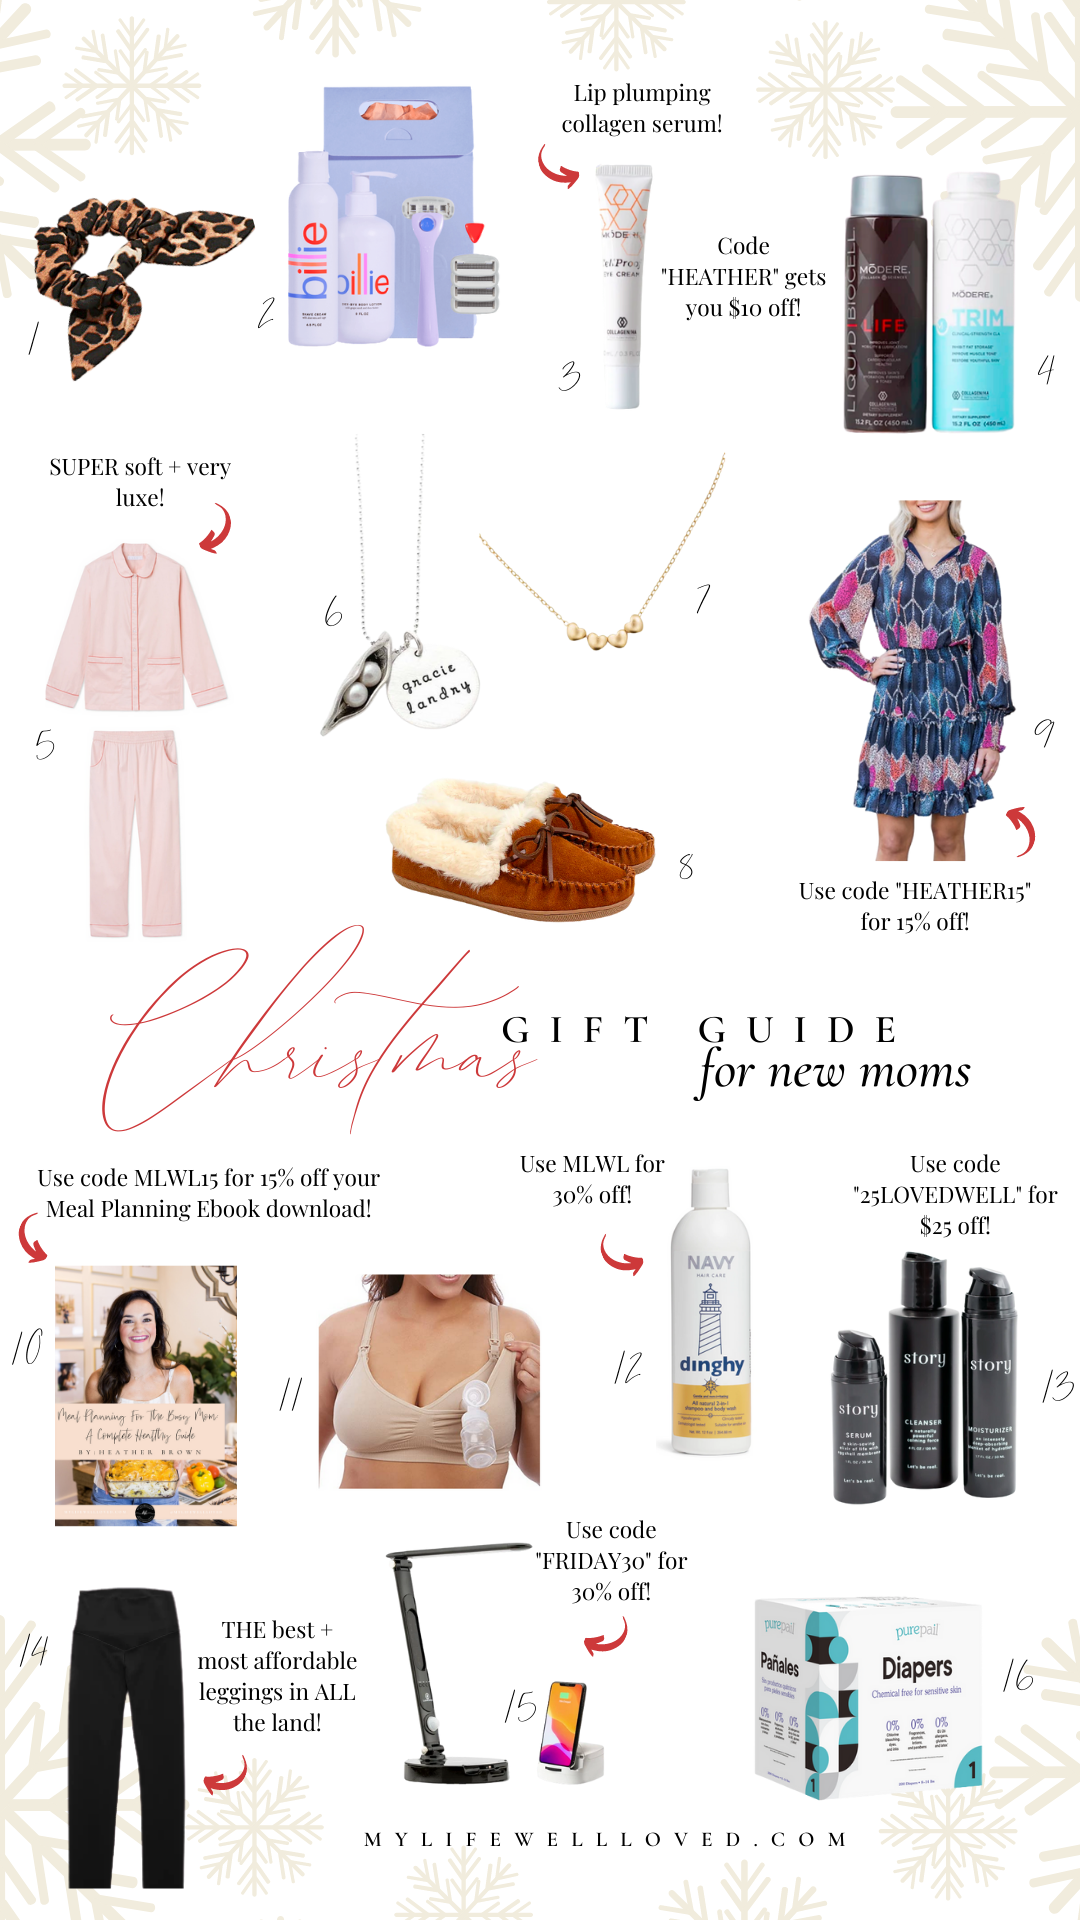 Baby & New Mom Gift Ideas for Christmas - Healthy By Heather Brown